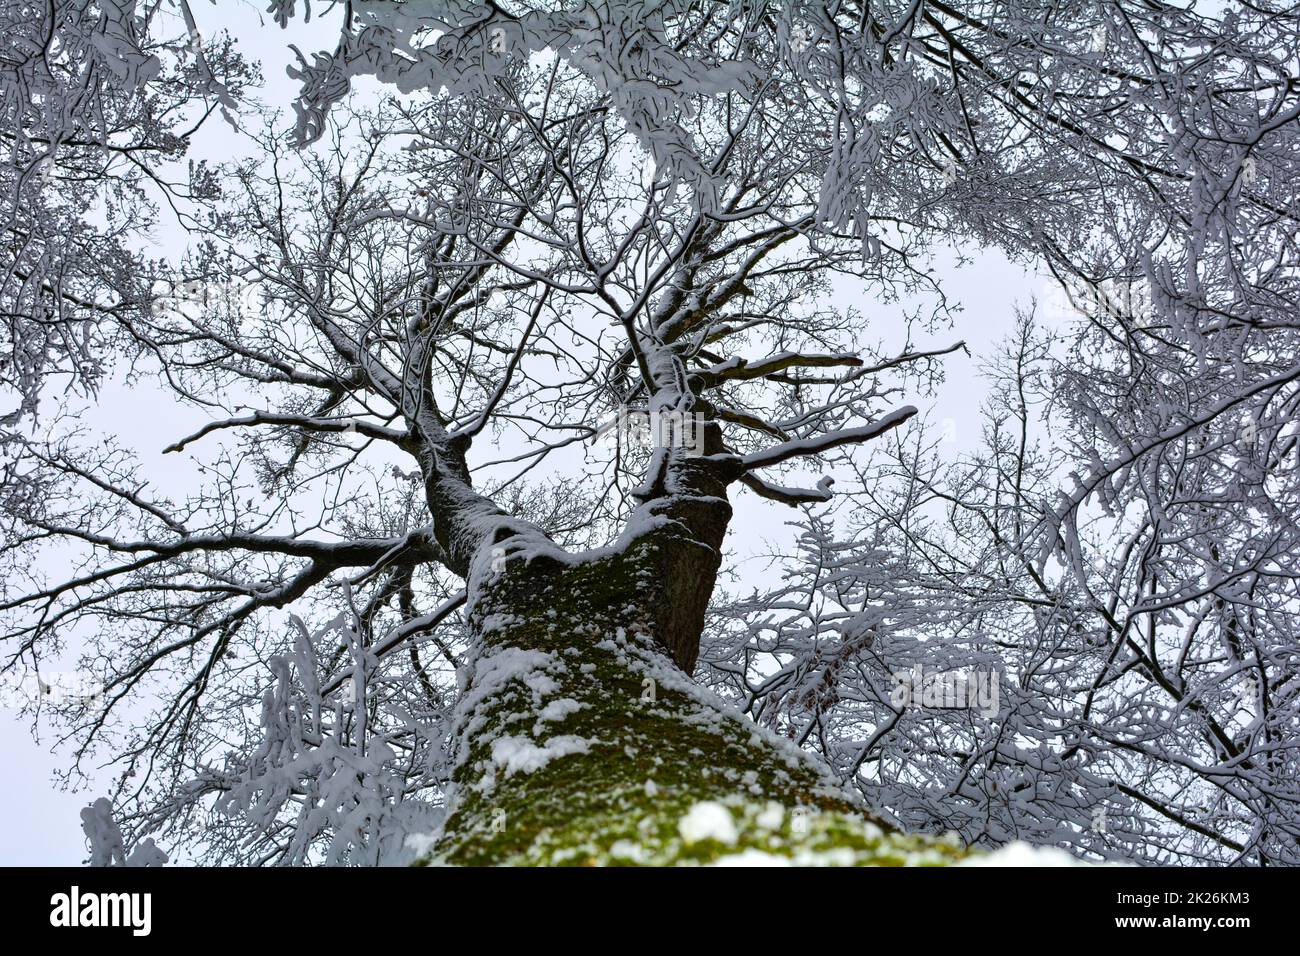 High tree with a view of the snow-covered treetop Stock Photo